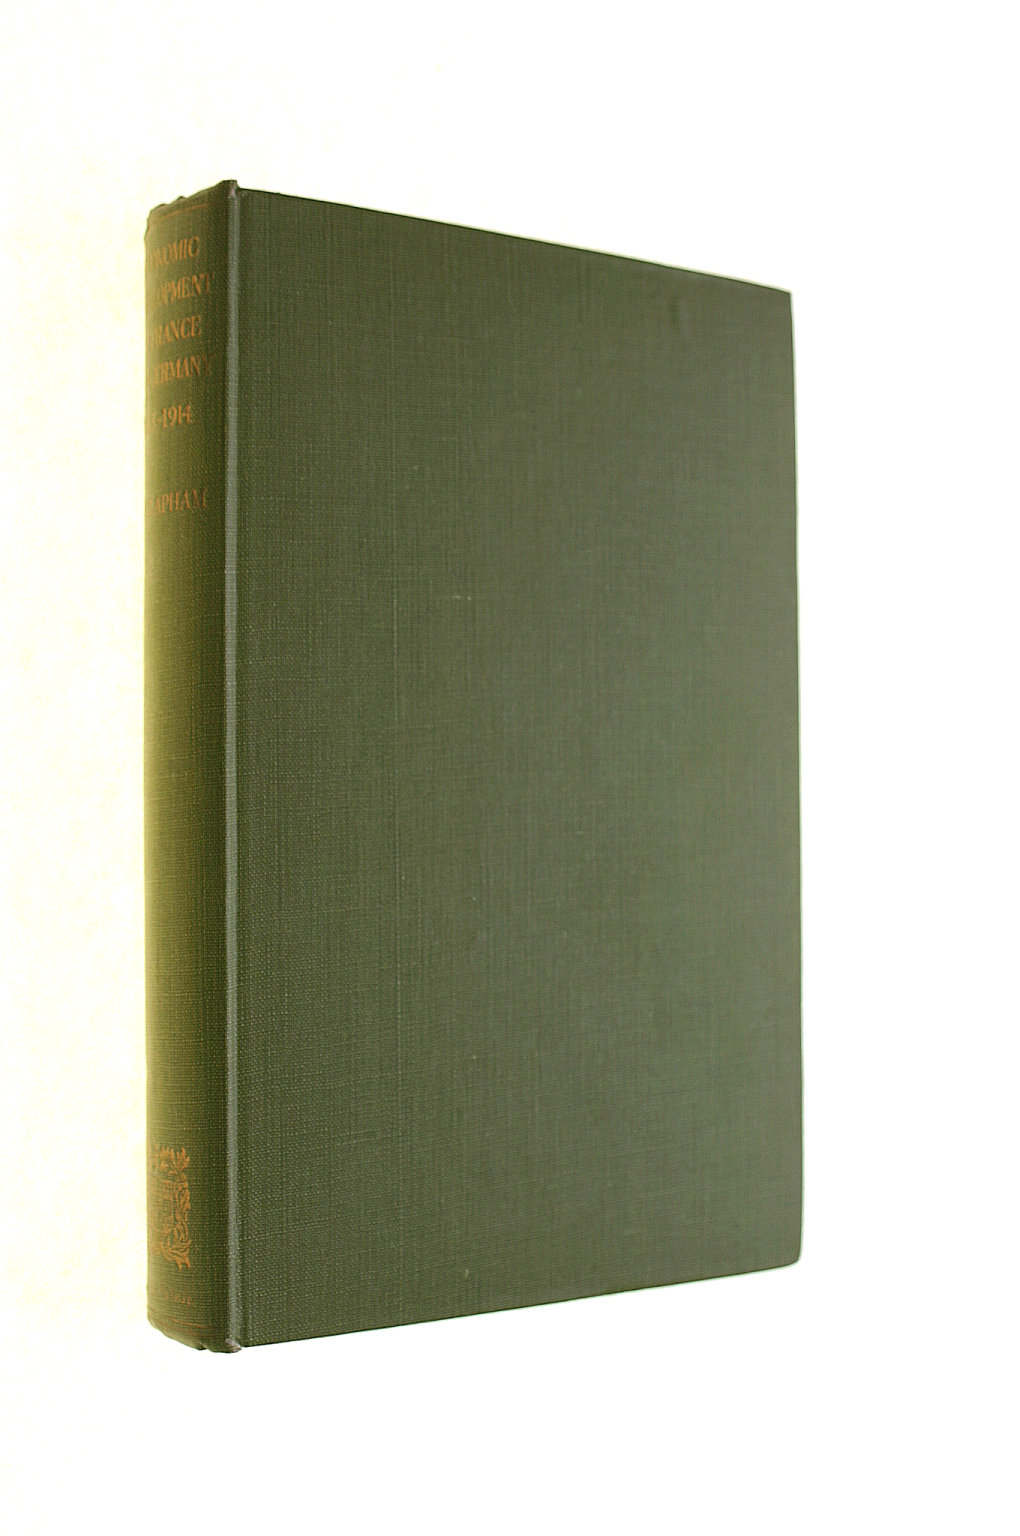 CLAPHAM, J H - The Economic Development of France and Germany: 1815-1914